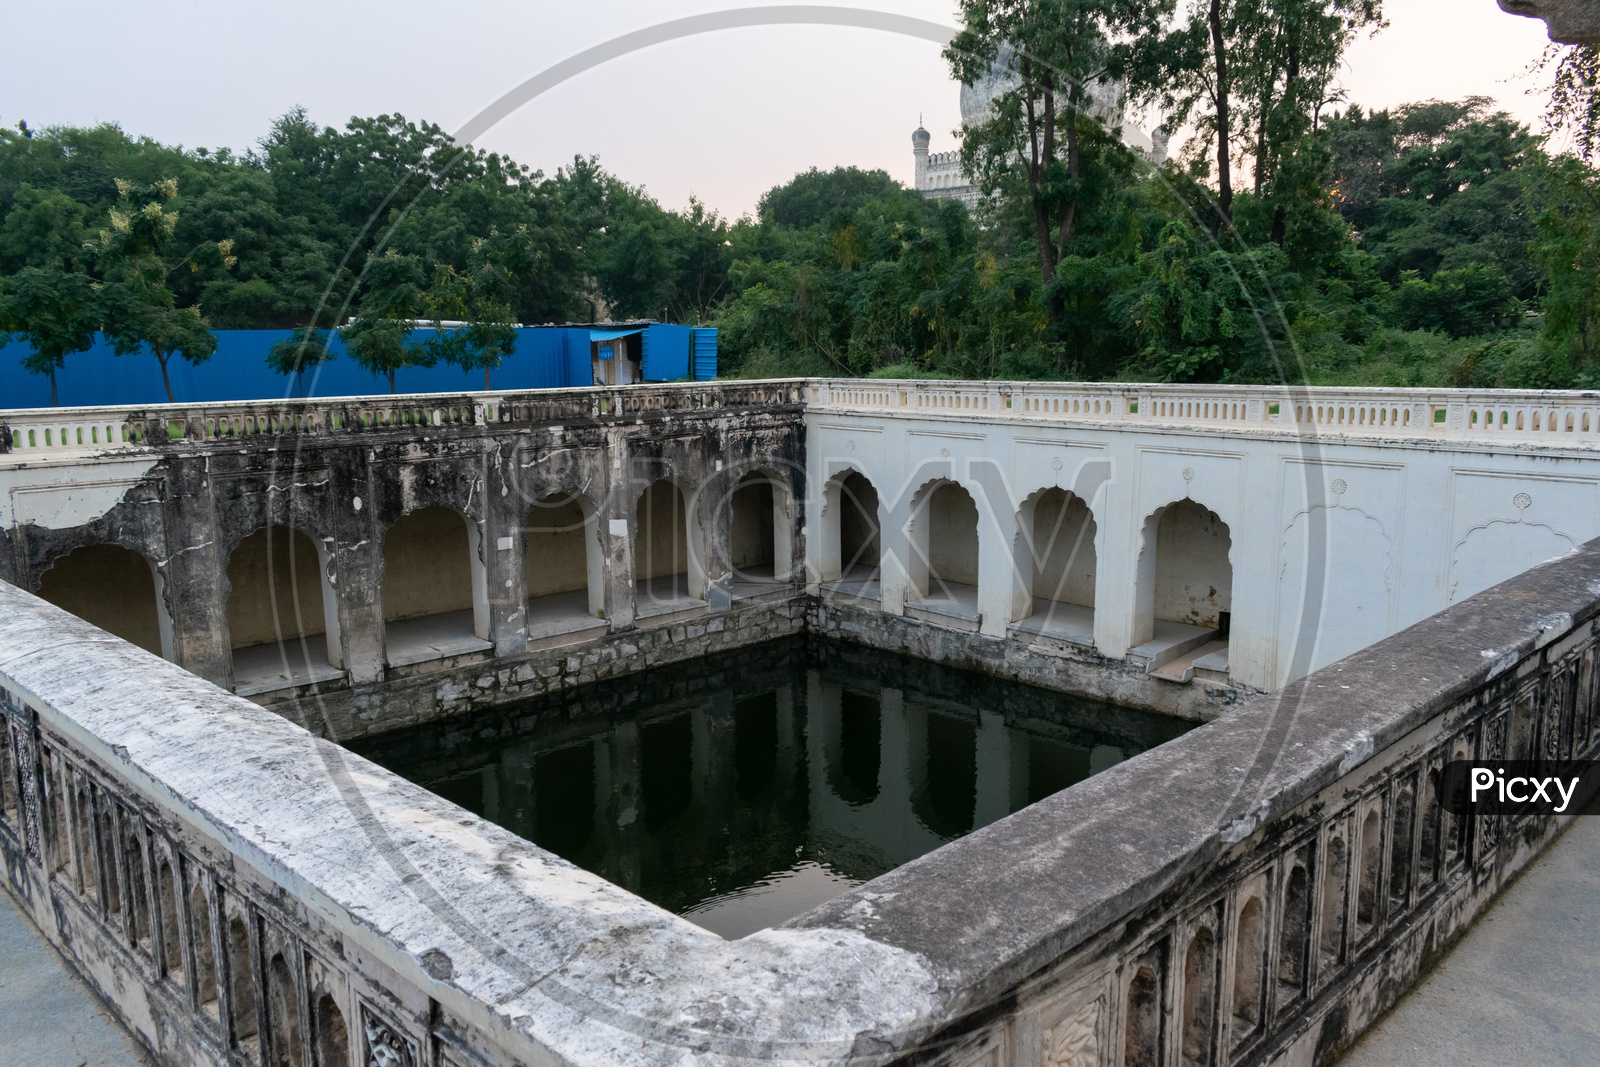 Architecture of An Water Tank In Qutub Shahi Tombs